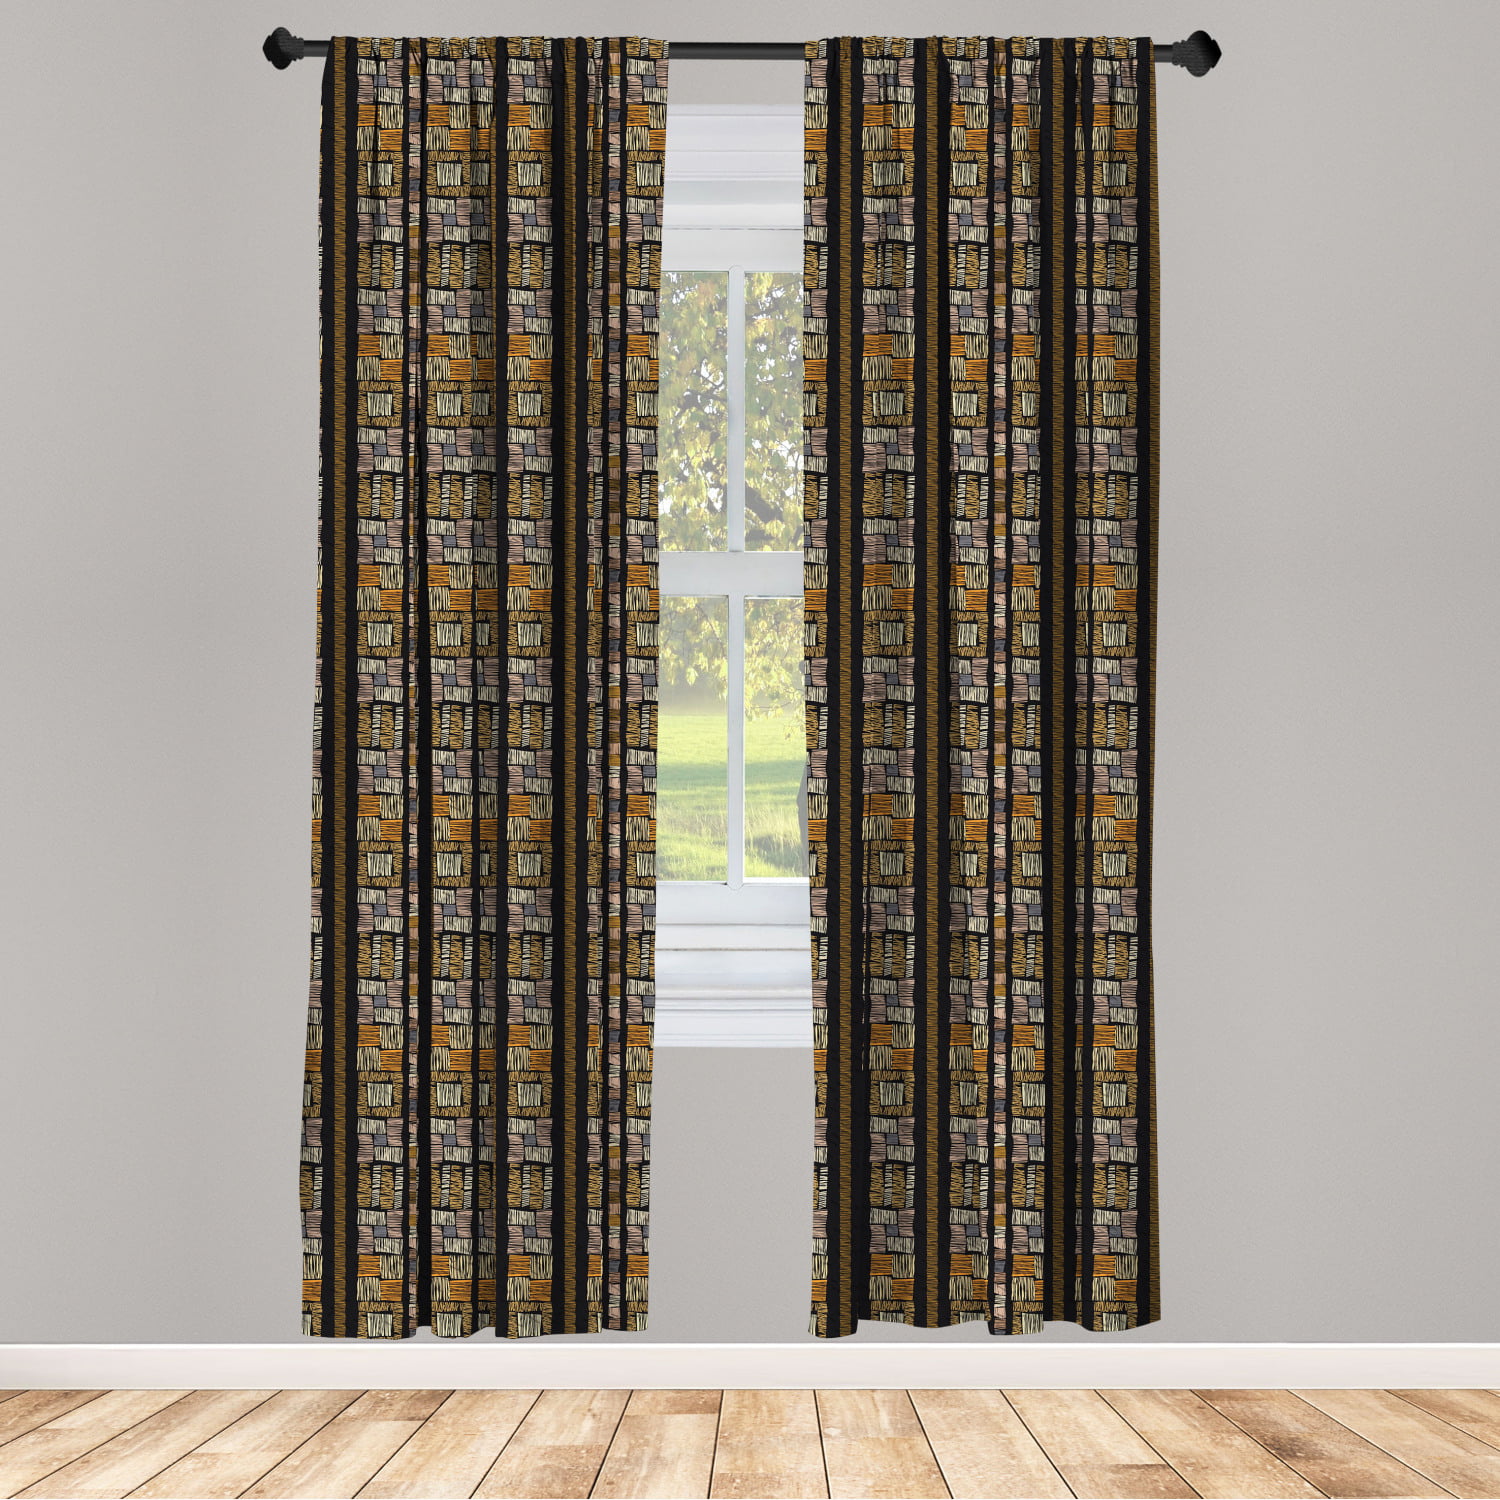 Zambia Curtains 2 Panels Set, Bohemian Civilization Striped Grunge Fashion  Culture Pattern, Window Drapes for Living Room Bedroom, 56